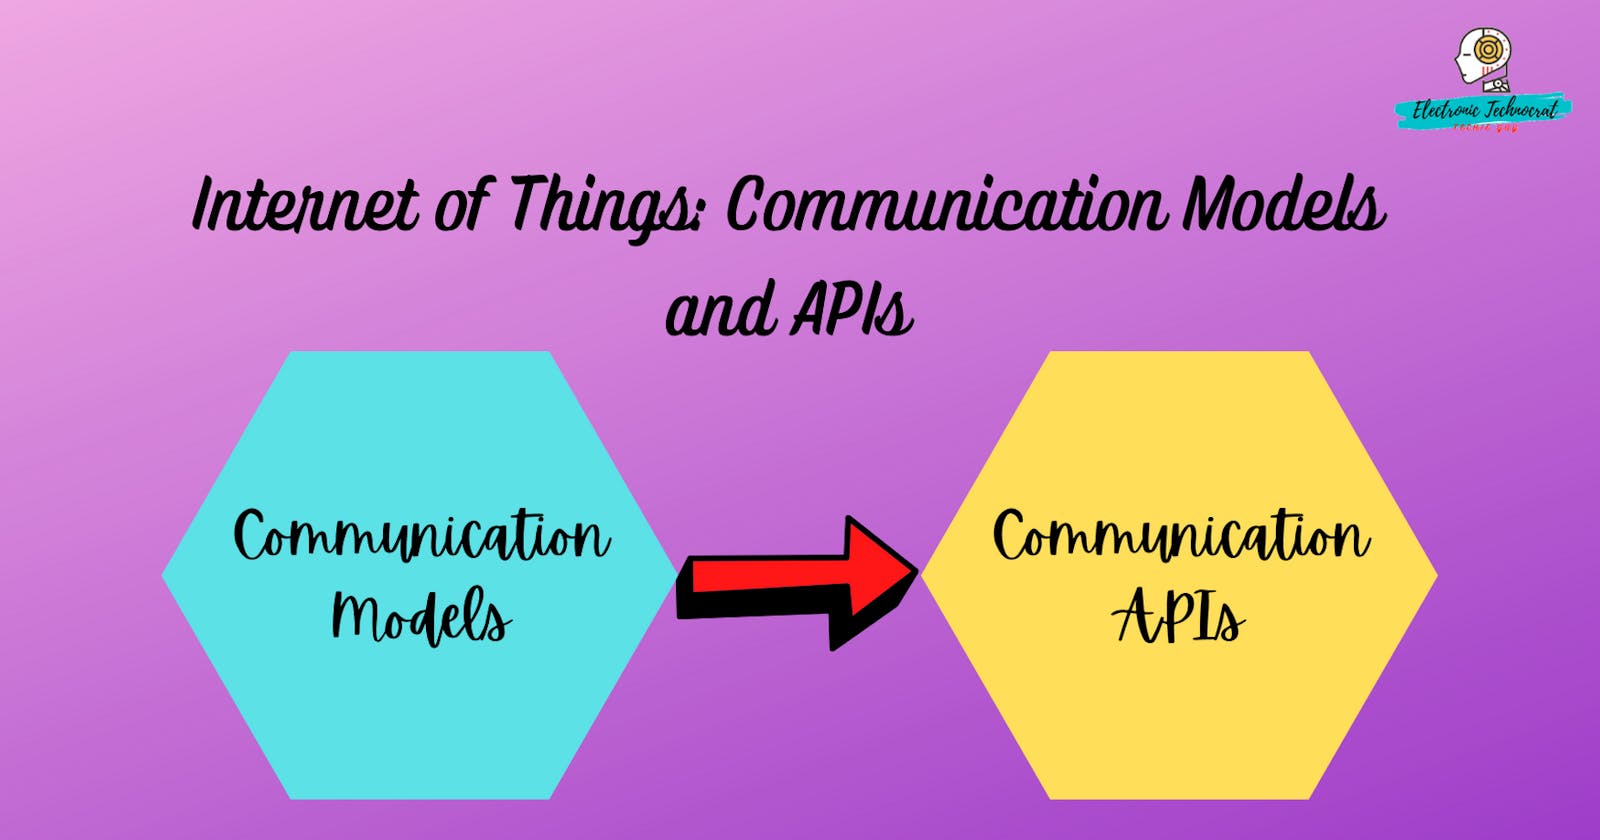 Internet of Things: Communication Models and APIs